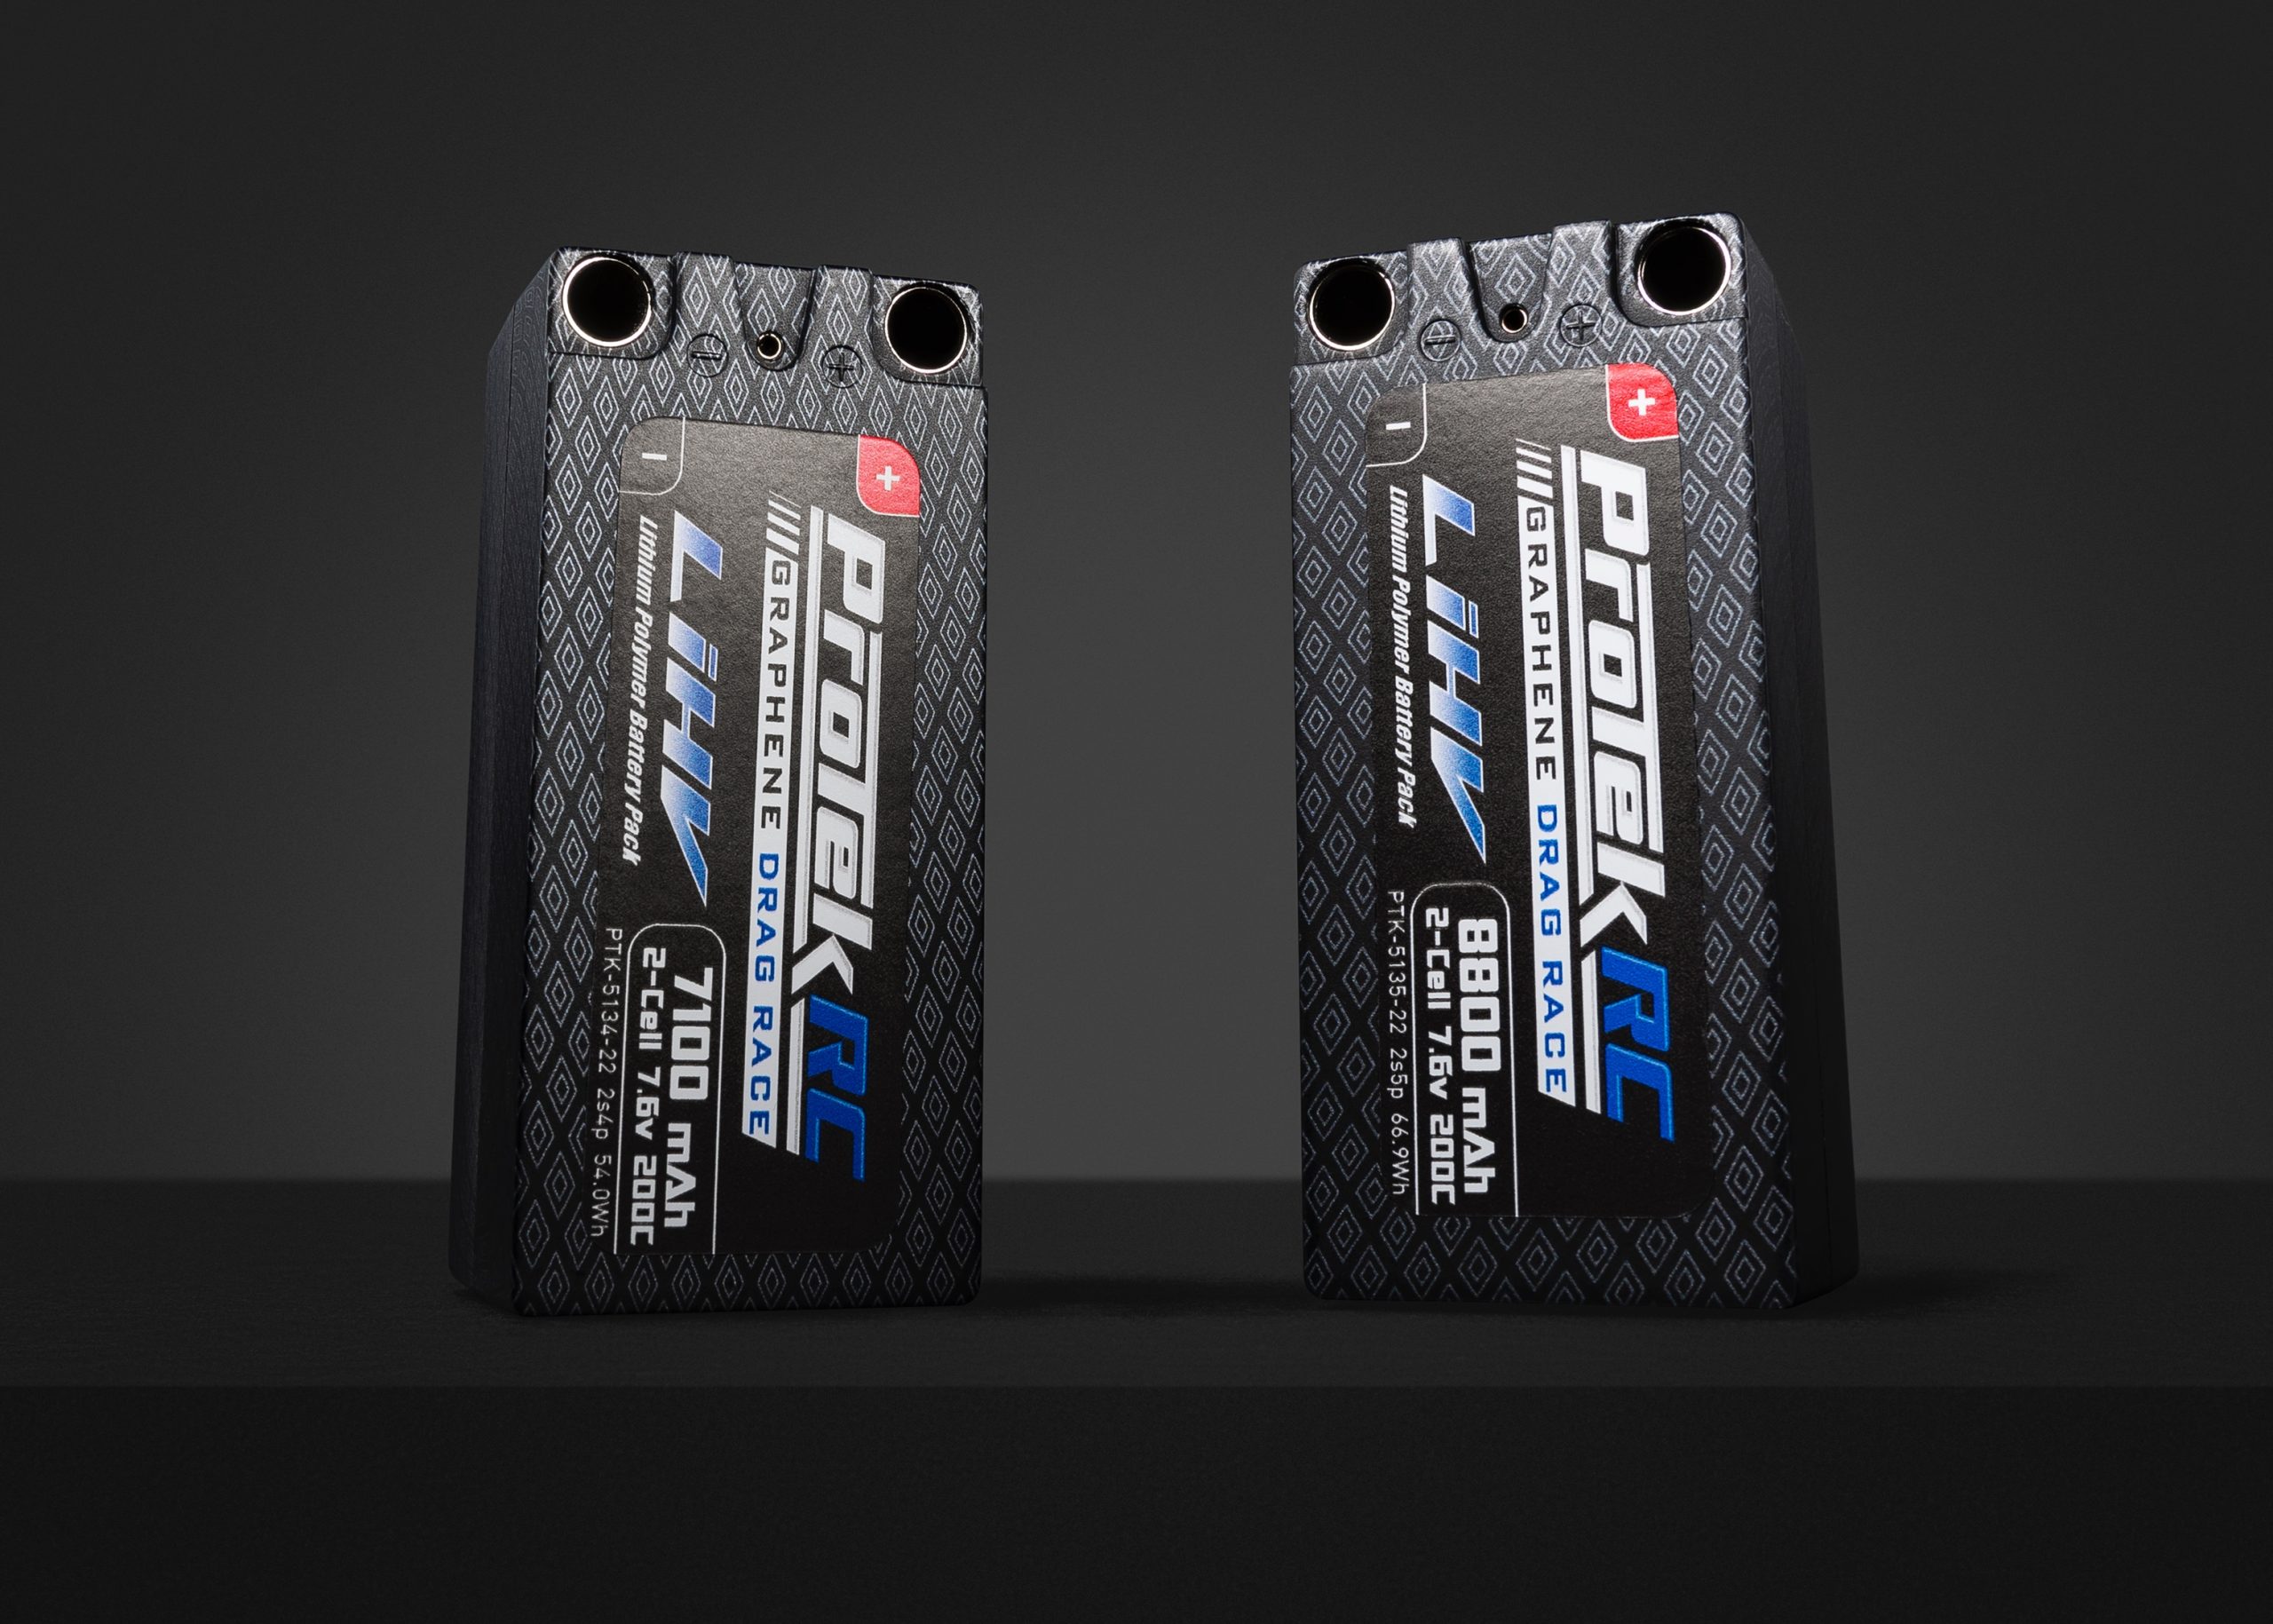 ProTek RC Goes Top Speed With Two New Drag Racing Batteries - RC